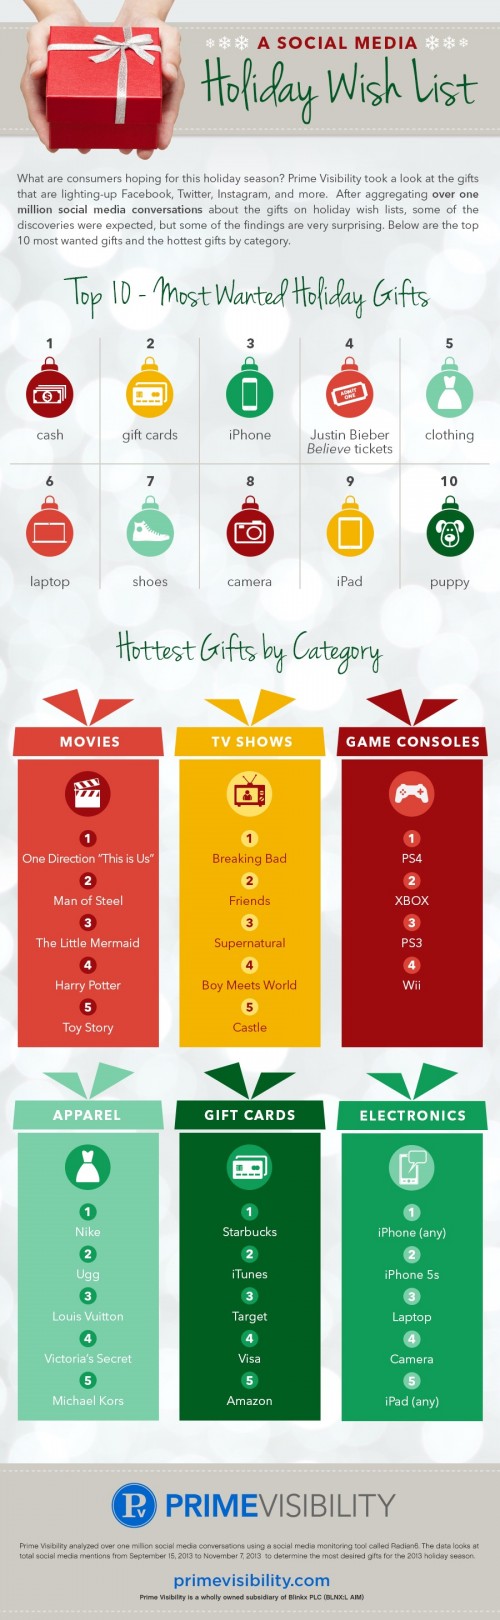 A-Social-Media-Holiday-Wish-List-infographic